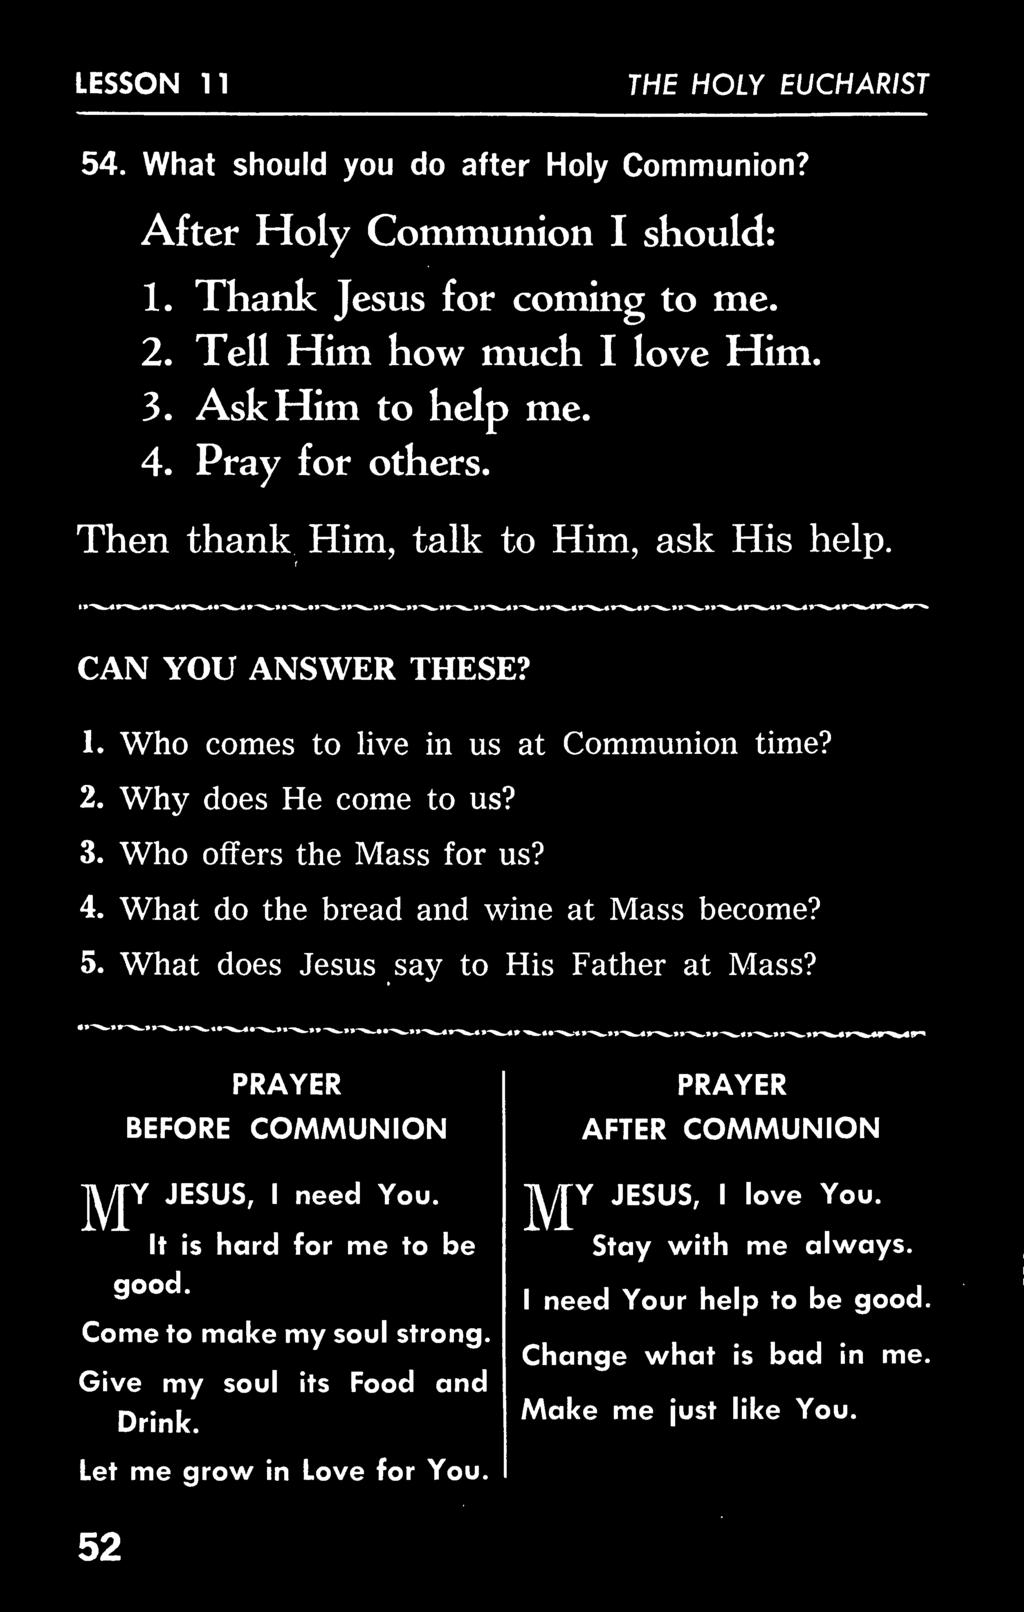 What does Jesus say to His Father at Mass? BEFORE PRAYER COMMUNION jy/ T JESUS, I need You. It is hard for me to be good.